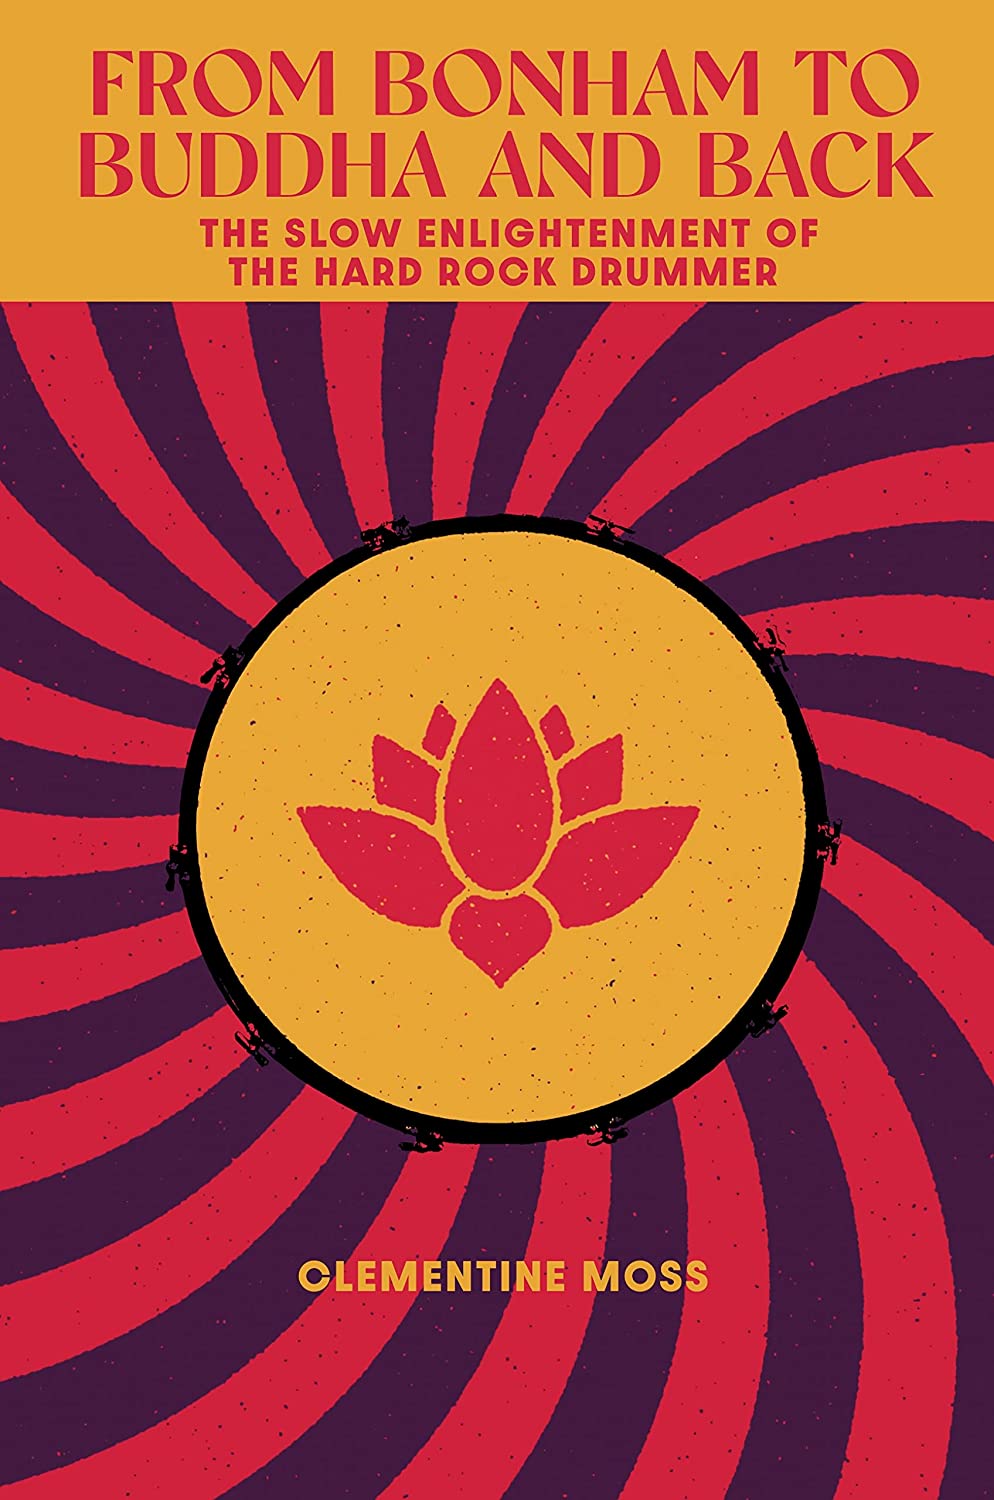 From Bonham to Buddha and Back: The Slow Enlightenment of the Hard Rock Drummer